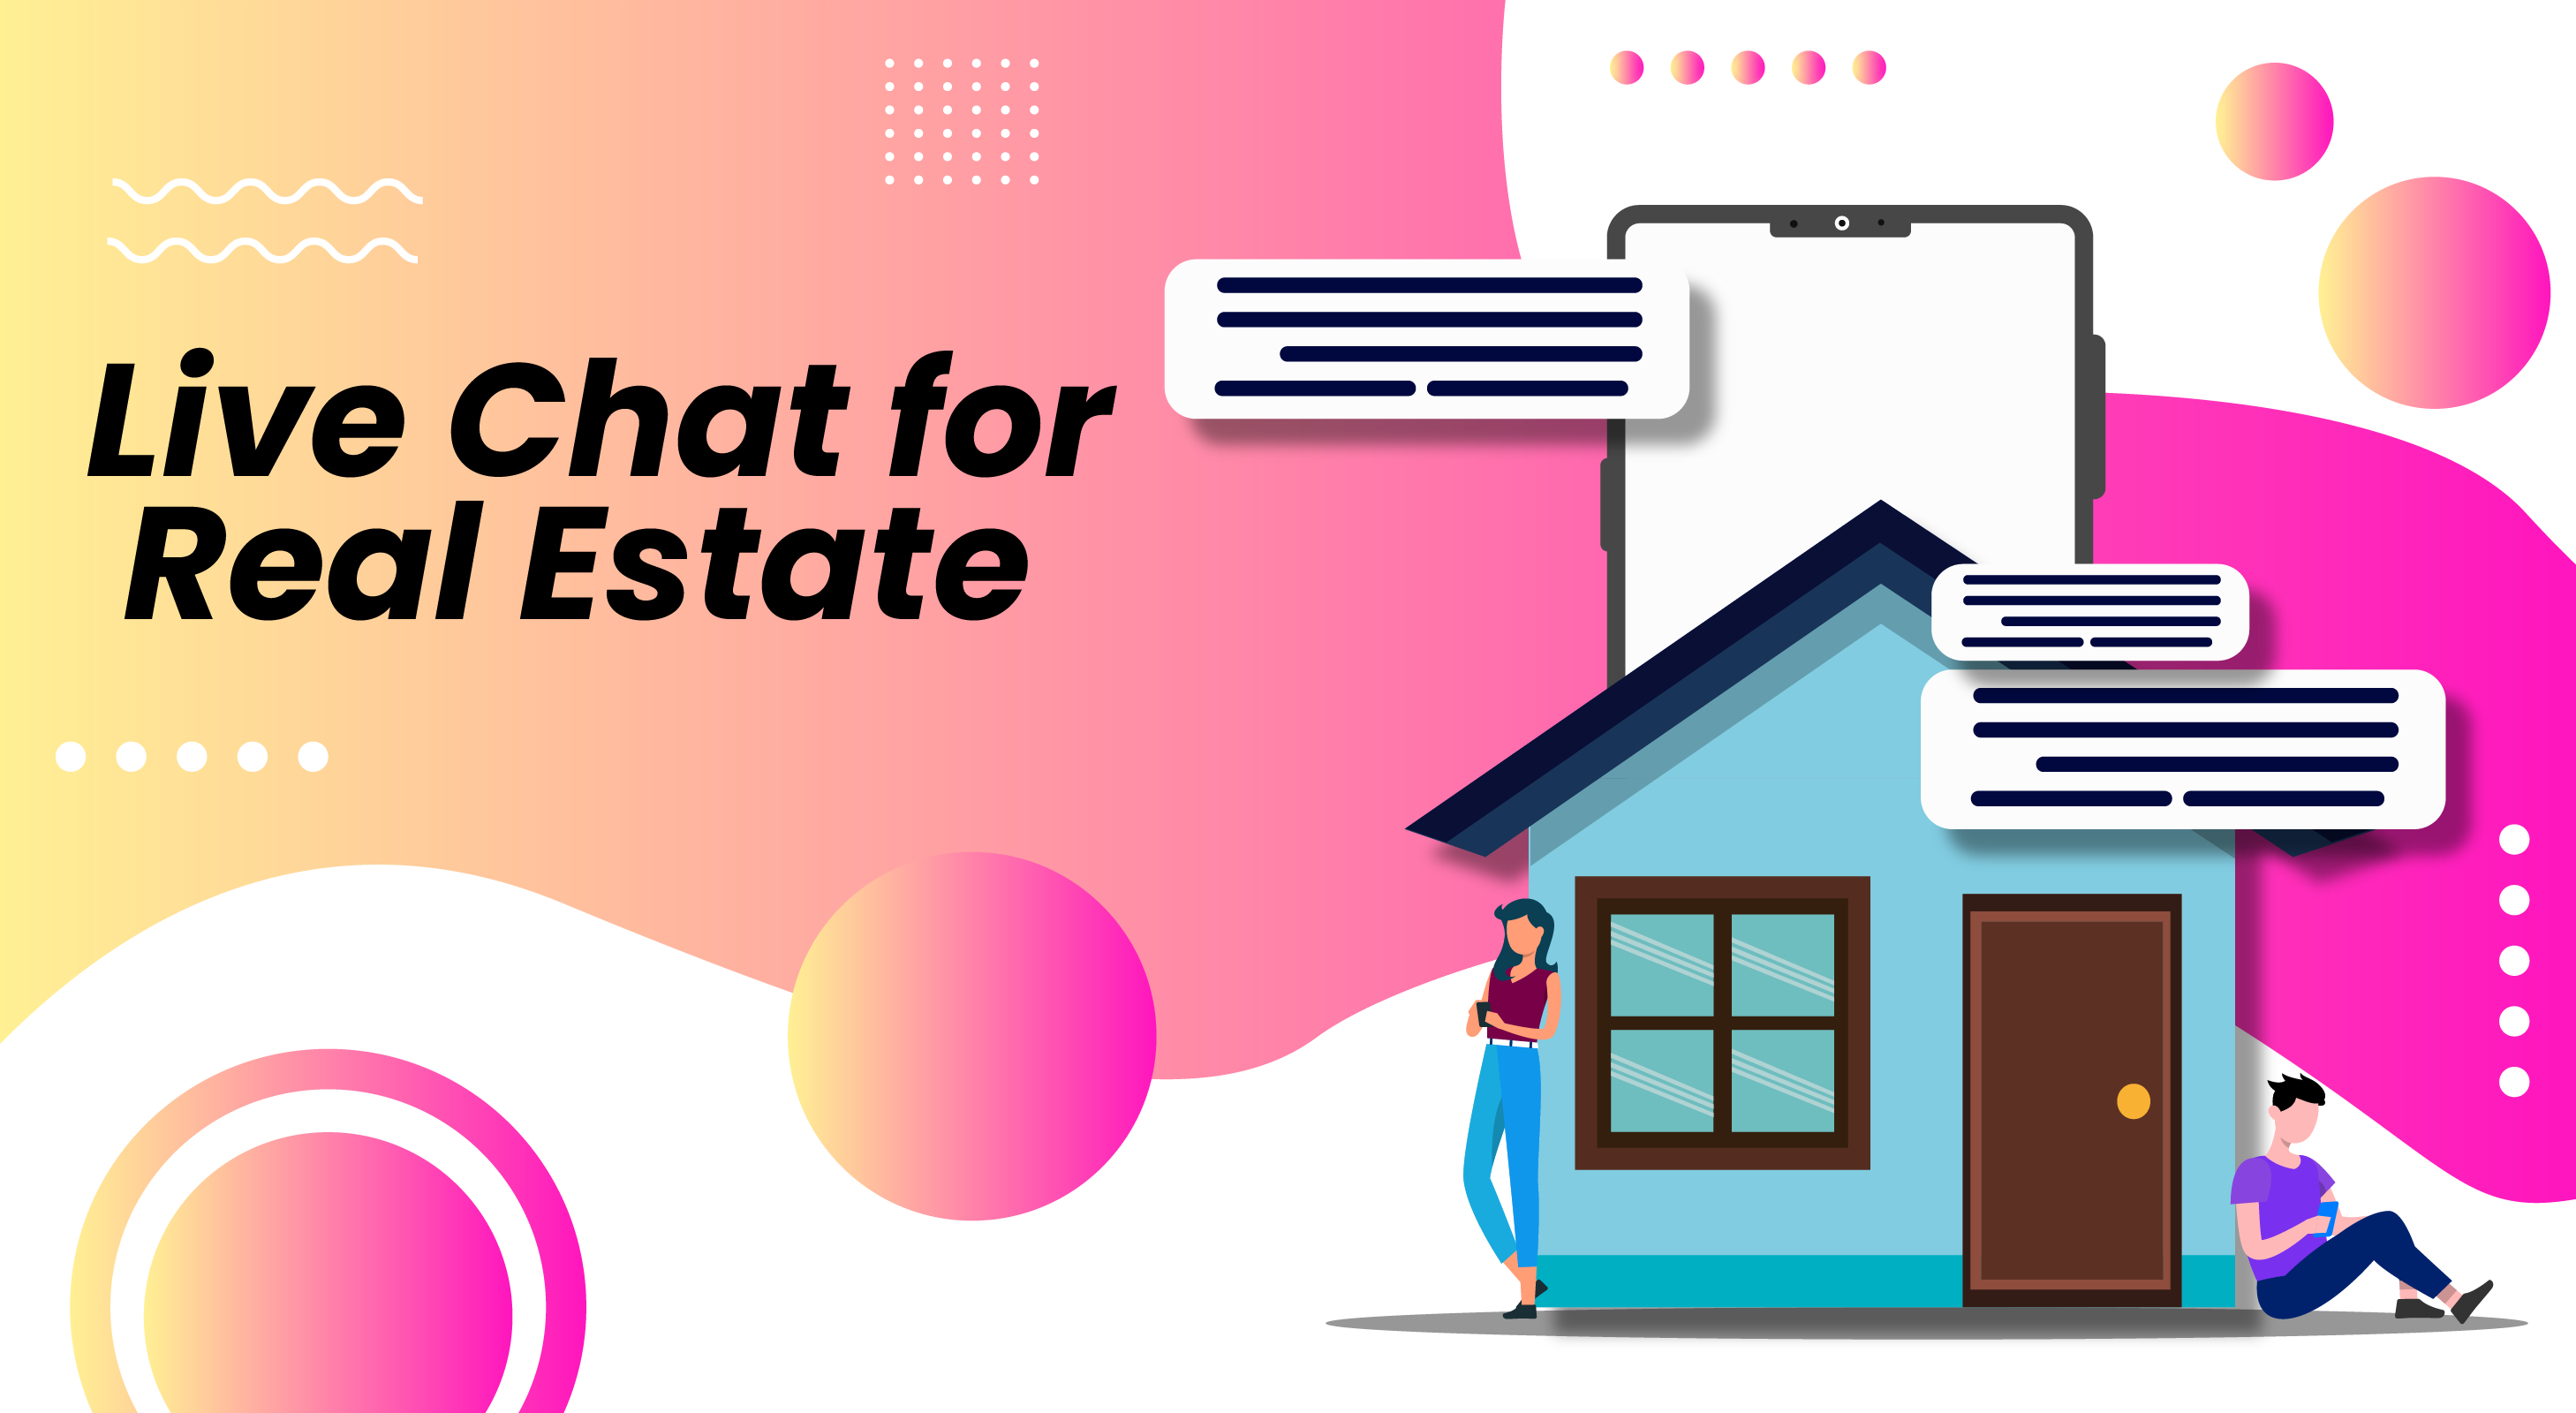 Live Chat for Real Estate – Benefits and Best Live Chat Applications